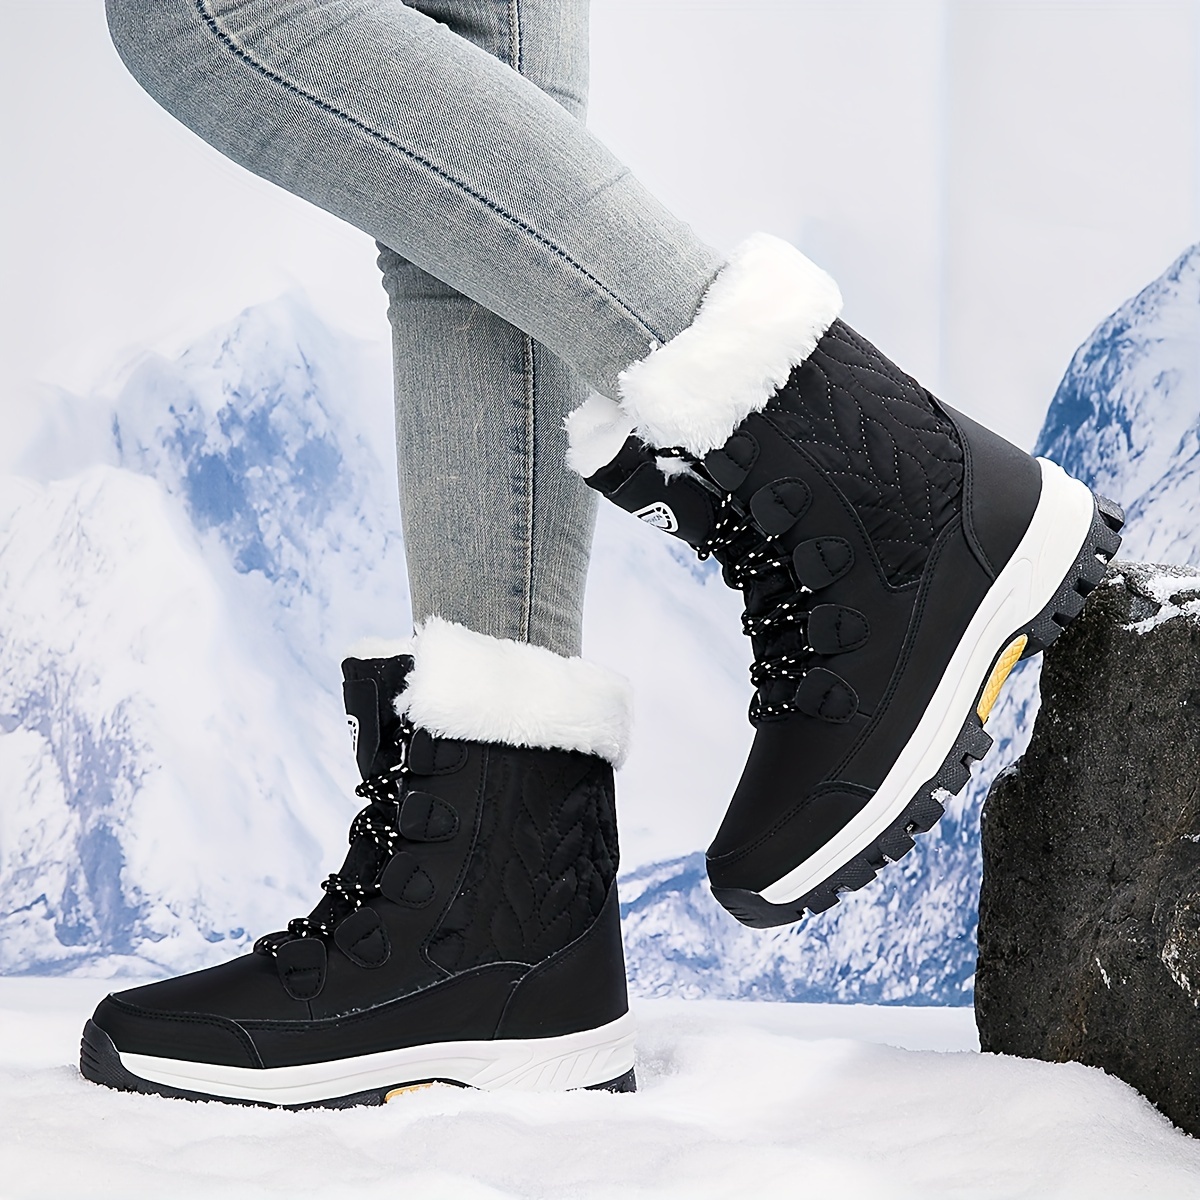 11 Best Winter Snow Boots for Women in 2018 - Cute and Waterproof Snow Boots